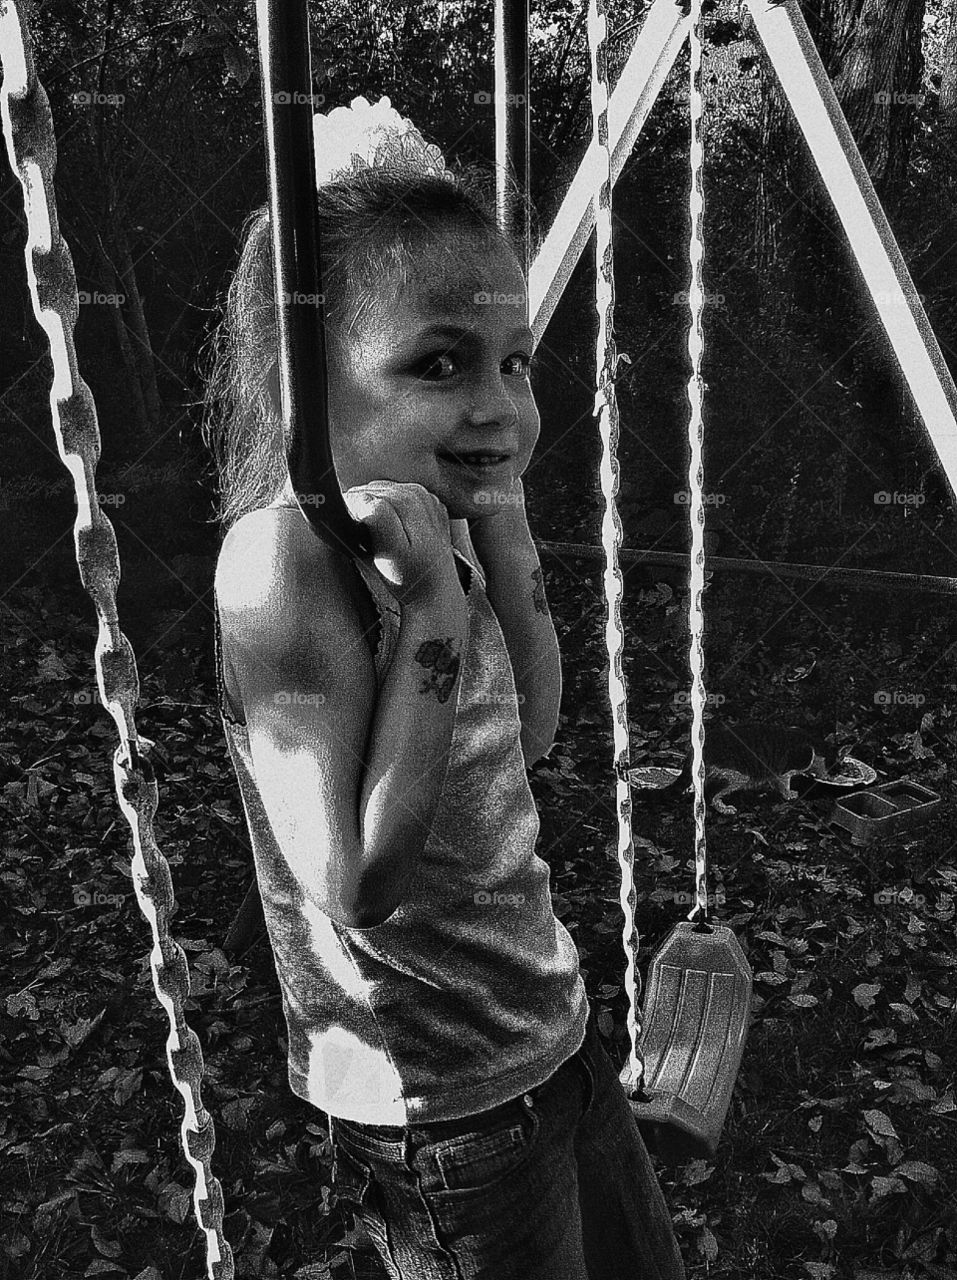 A little girl plays on a swing set in a small town in rural Arkansas